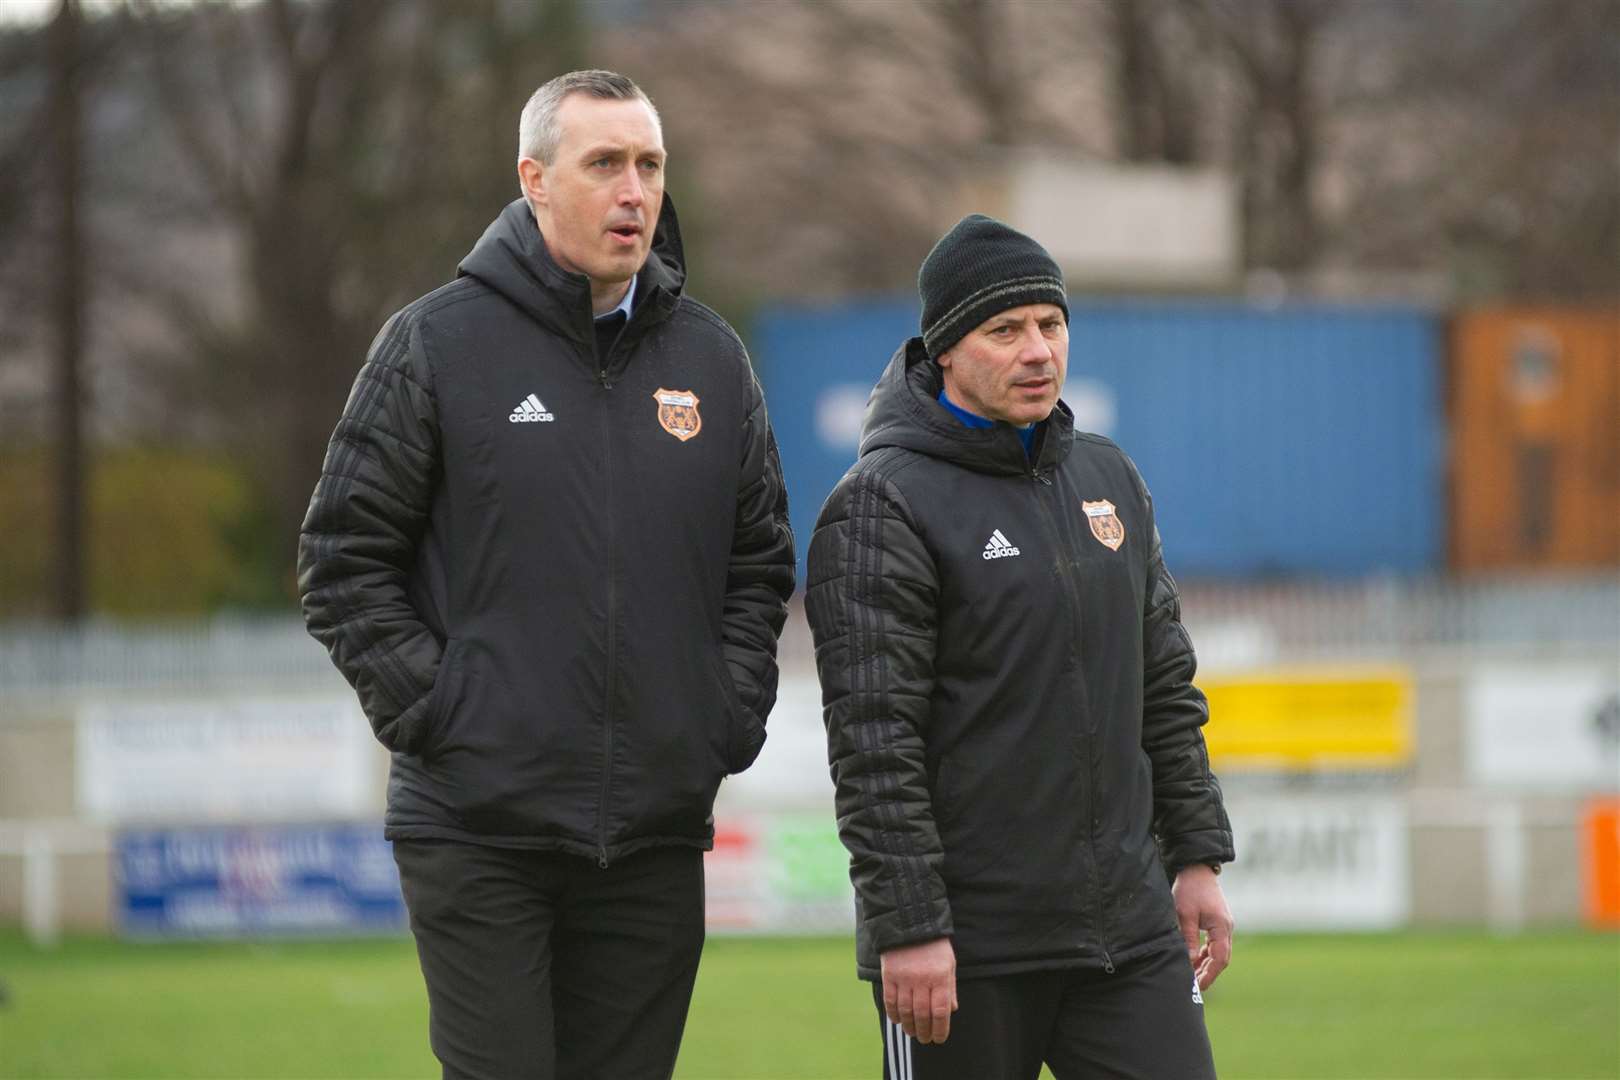 Gordon Connelly (right) and Steven MacDonald, pictured during their spell at Rothes, will make up two-thirds of Forres Mechanics’ new management team. Picture: Daniel Forsyth